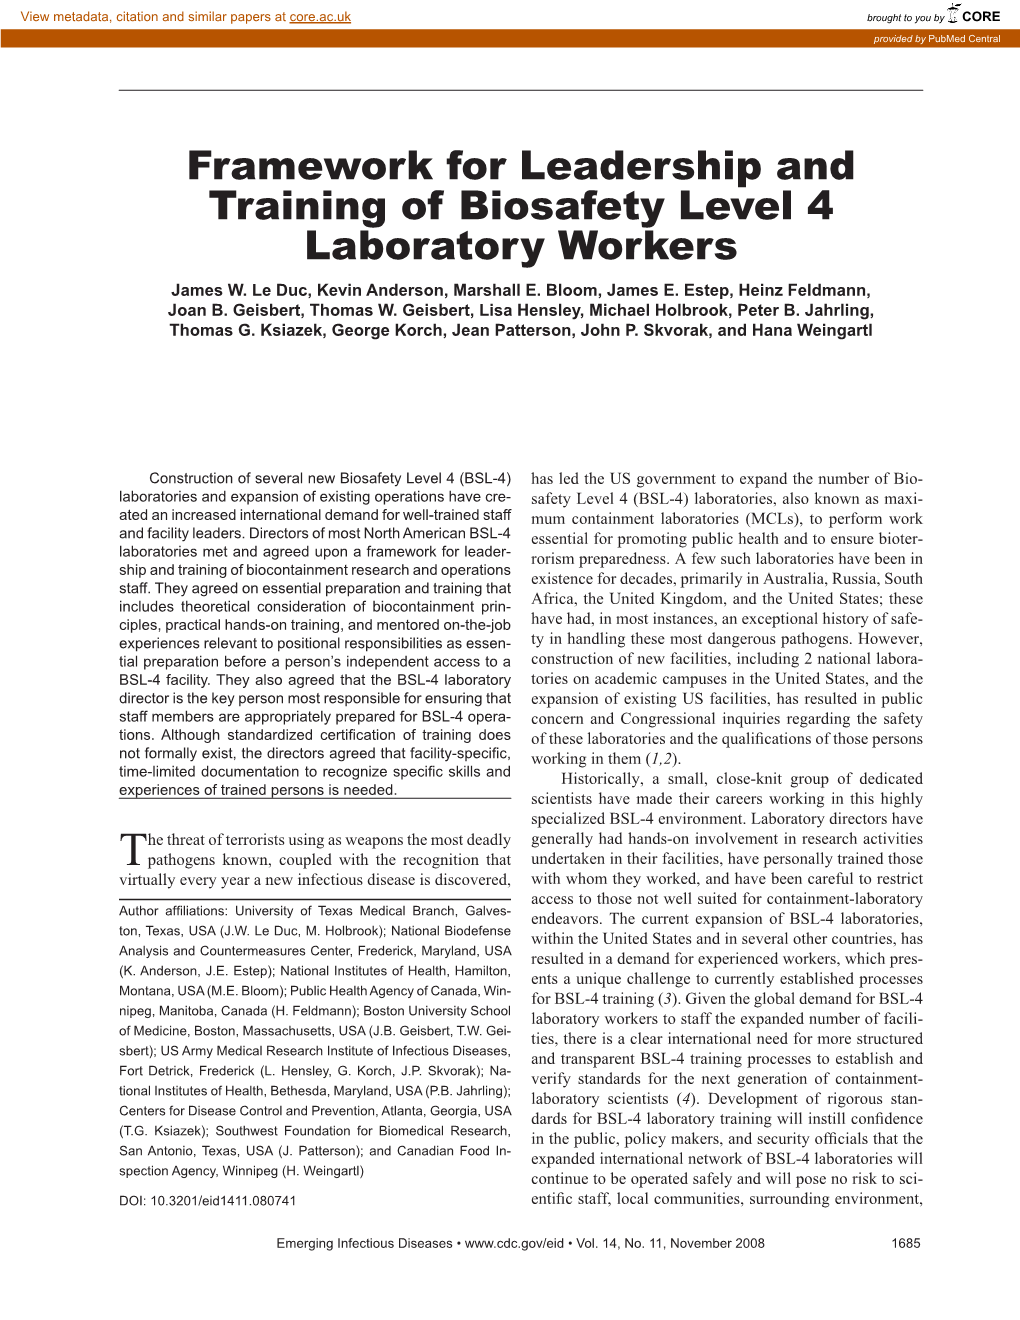 Framework for Leadership and Training of Biosafety Level 4 Laboratory Workers James W